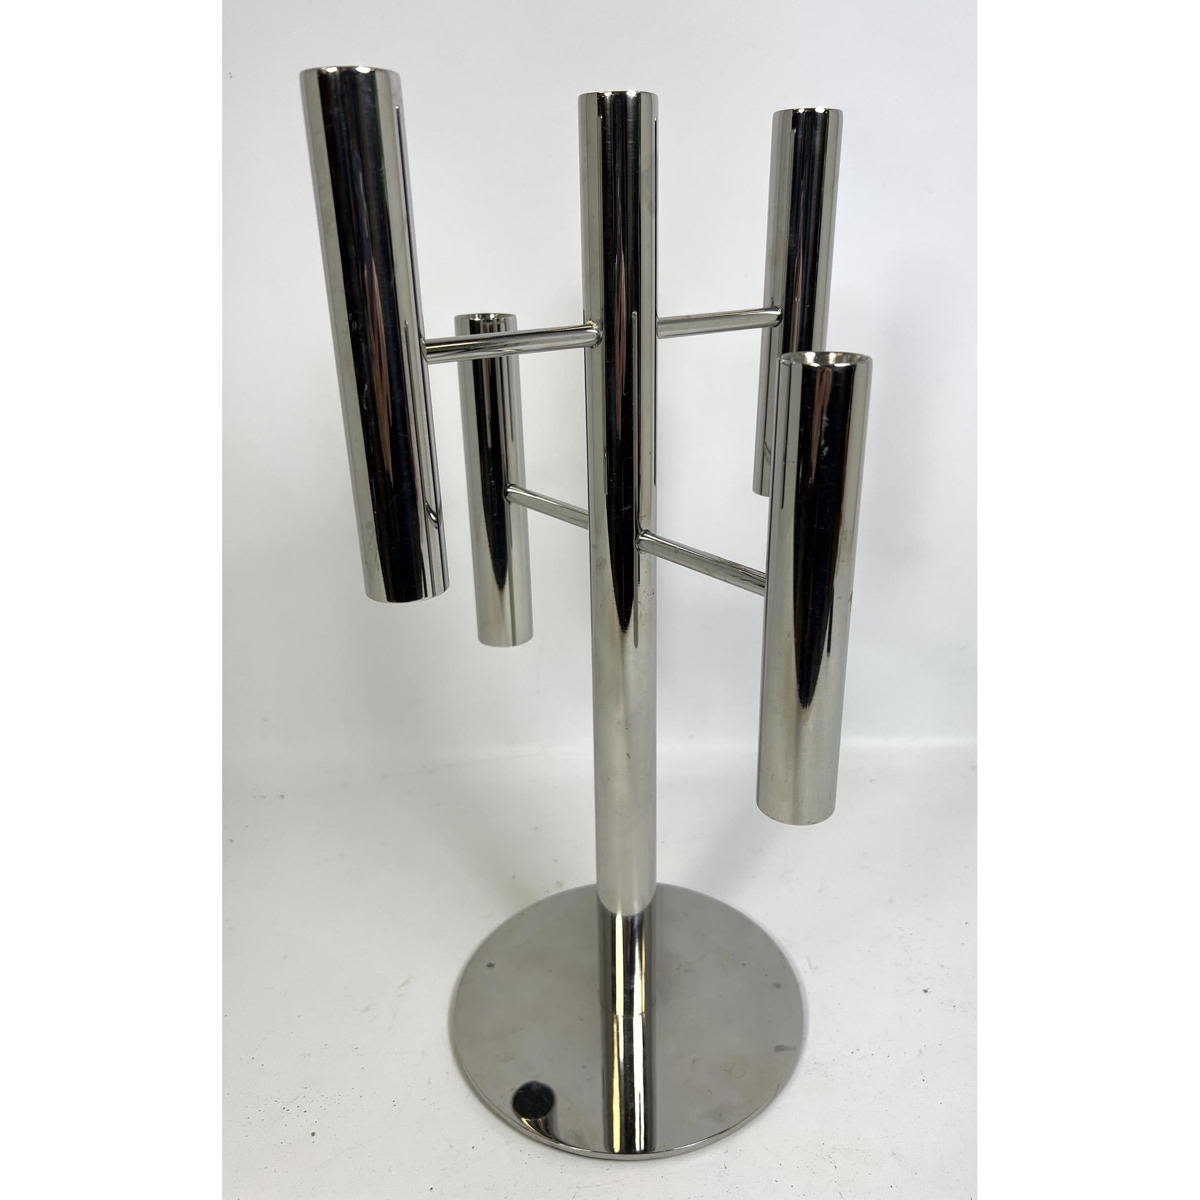 Modernist style Chrome Candle Stick